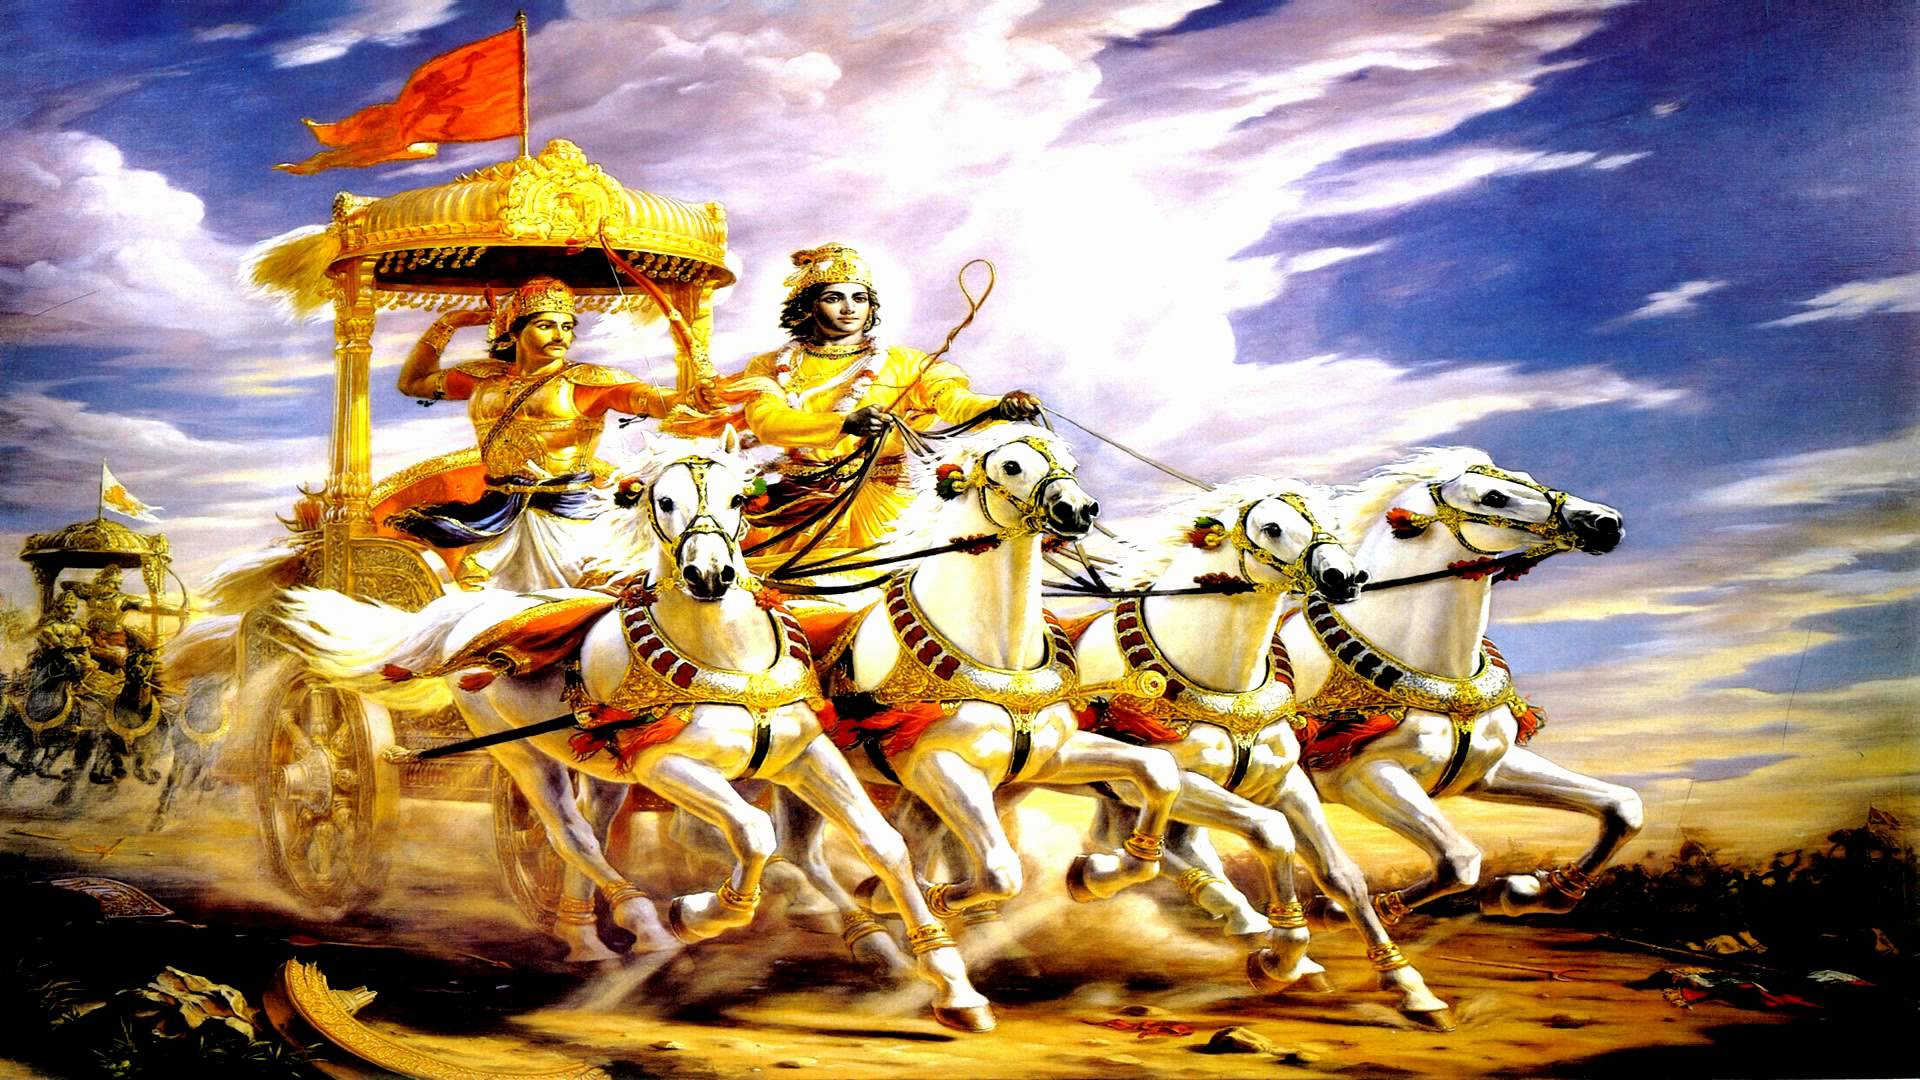 Lord krishna Bhagwat Geeta slok poster for home/Living Room /decor Fine Art  Print - Quotes & Motivation posters in India - Buy art, film, design,  movie, music, nature and educational paintings/wallpapers at